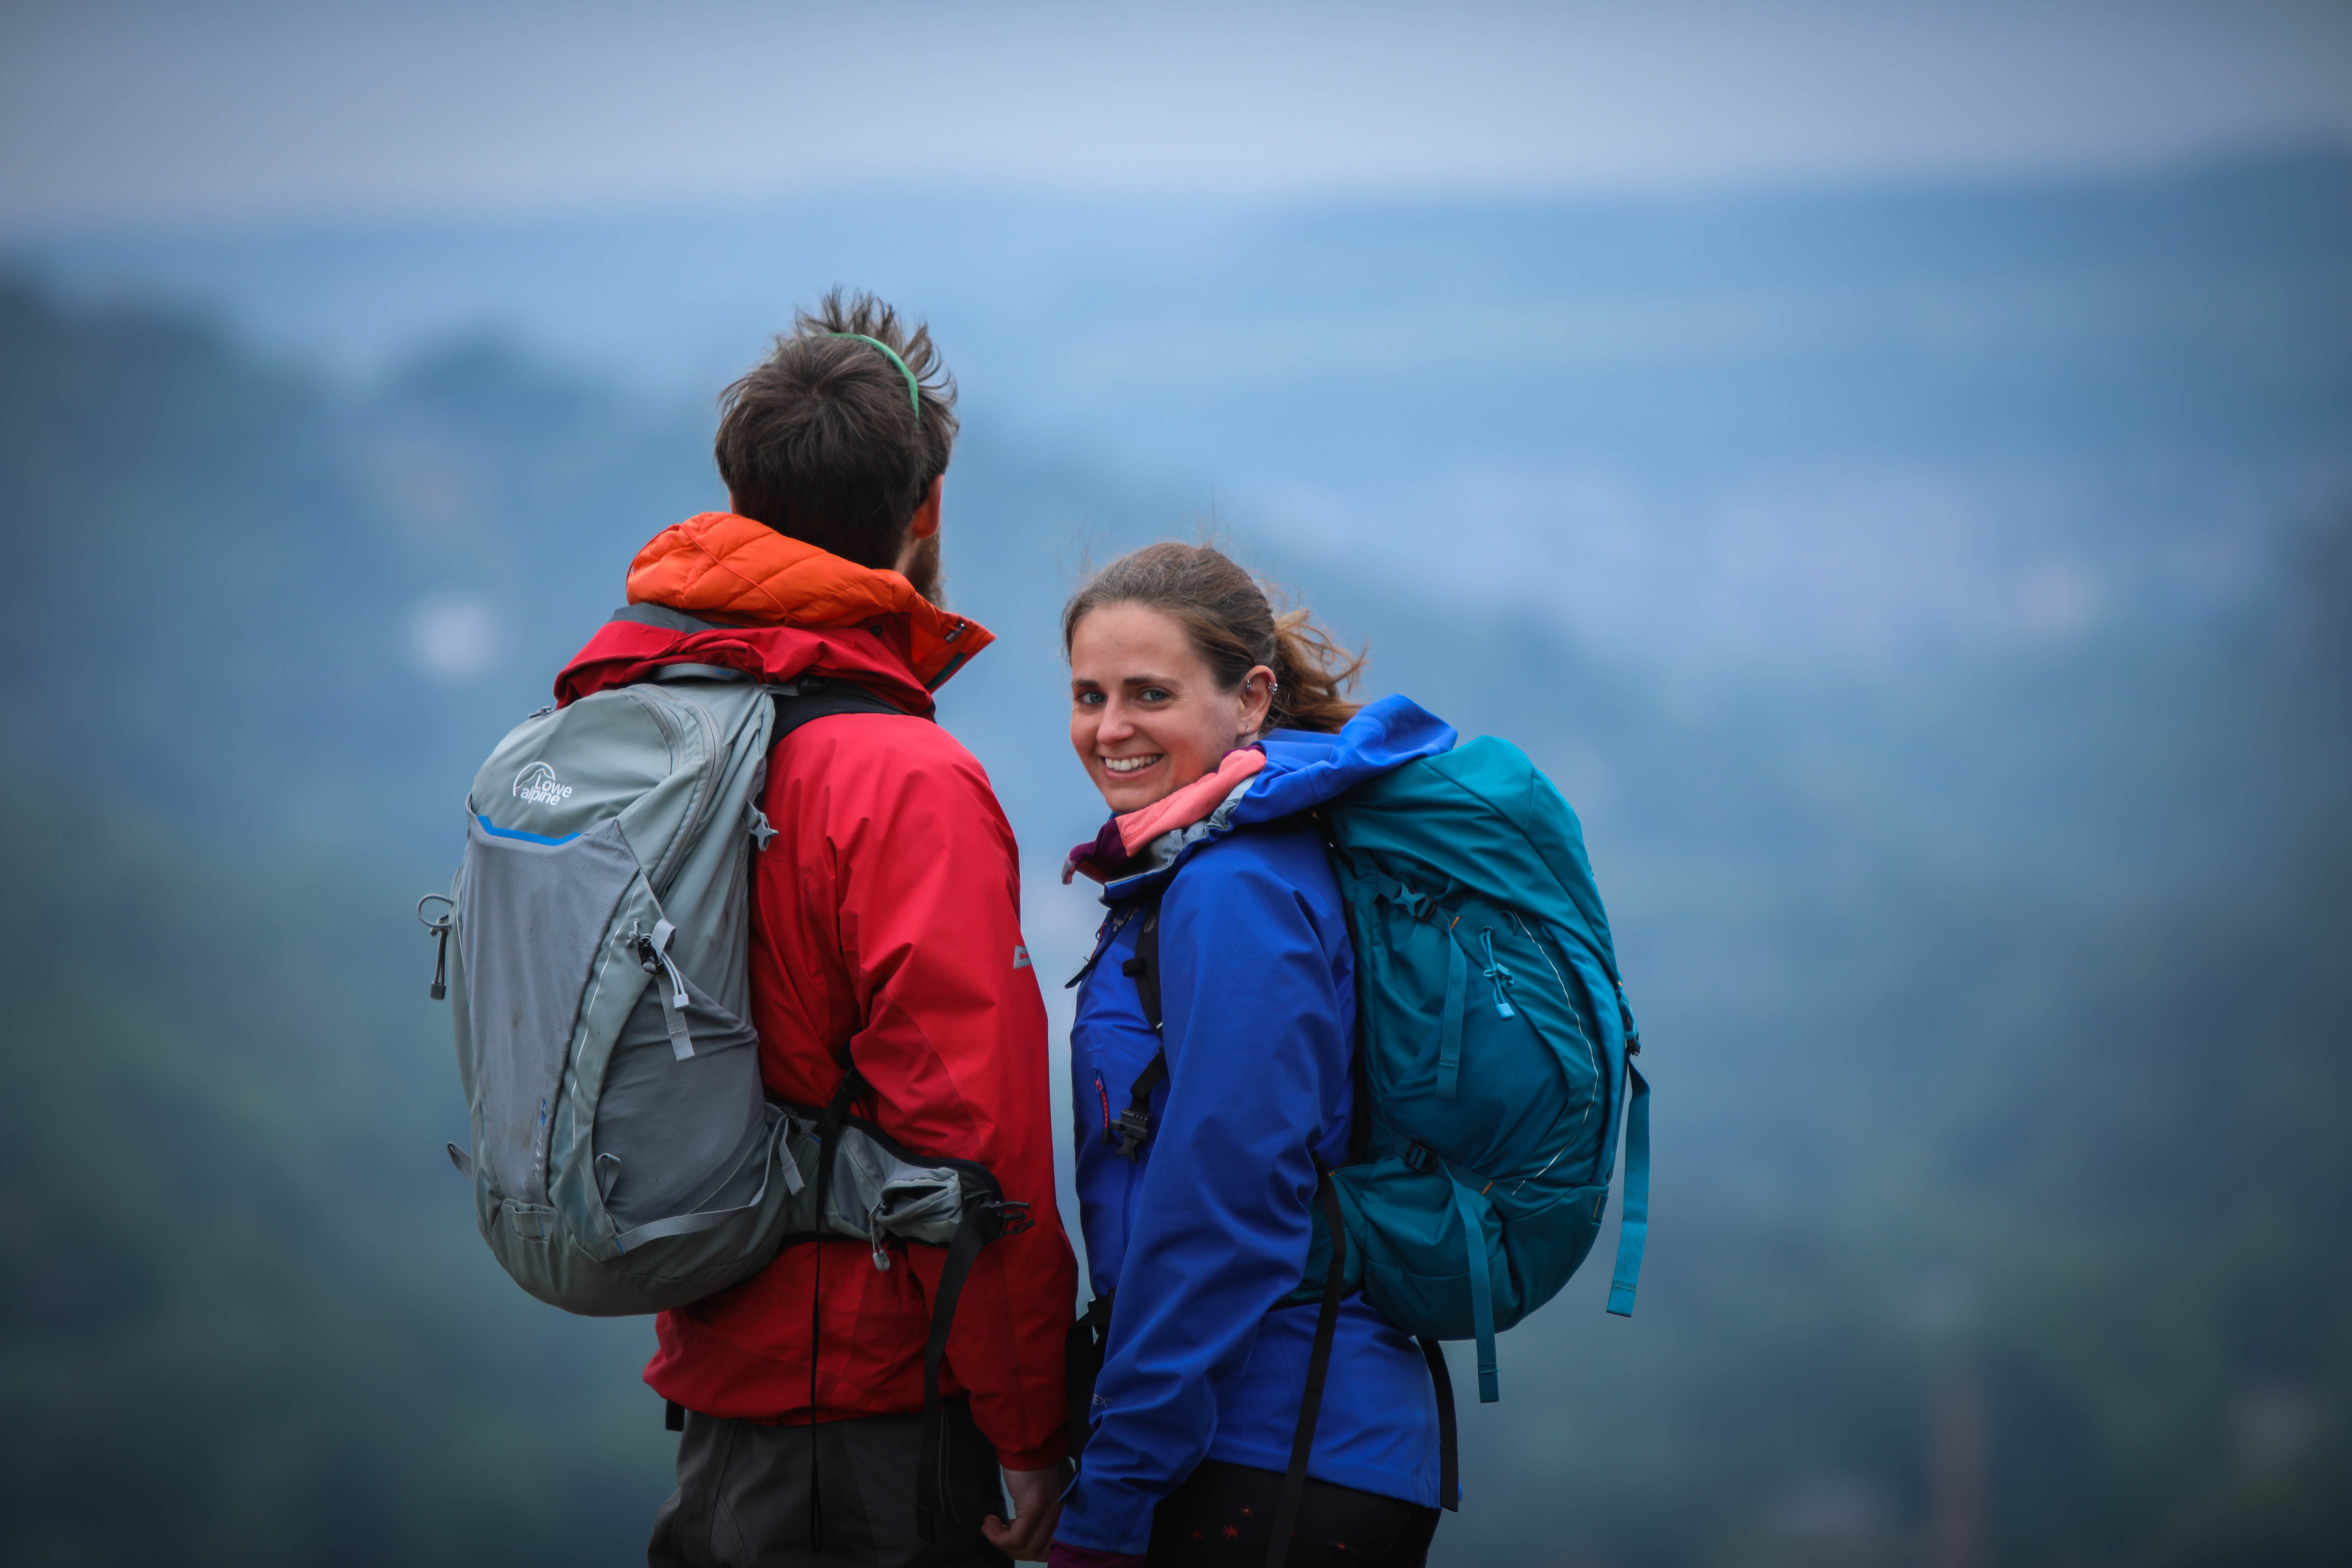 How to look after your outdoor clothing